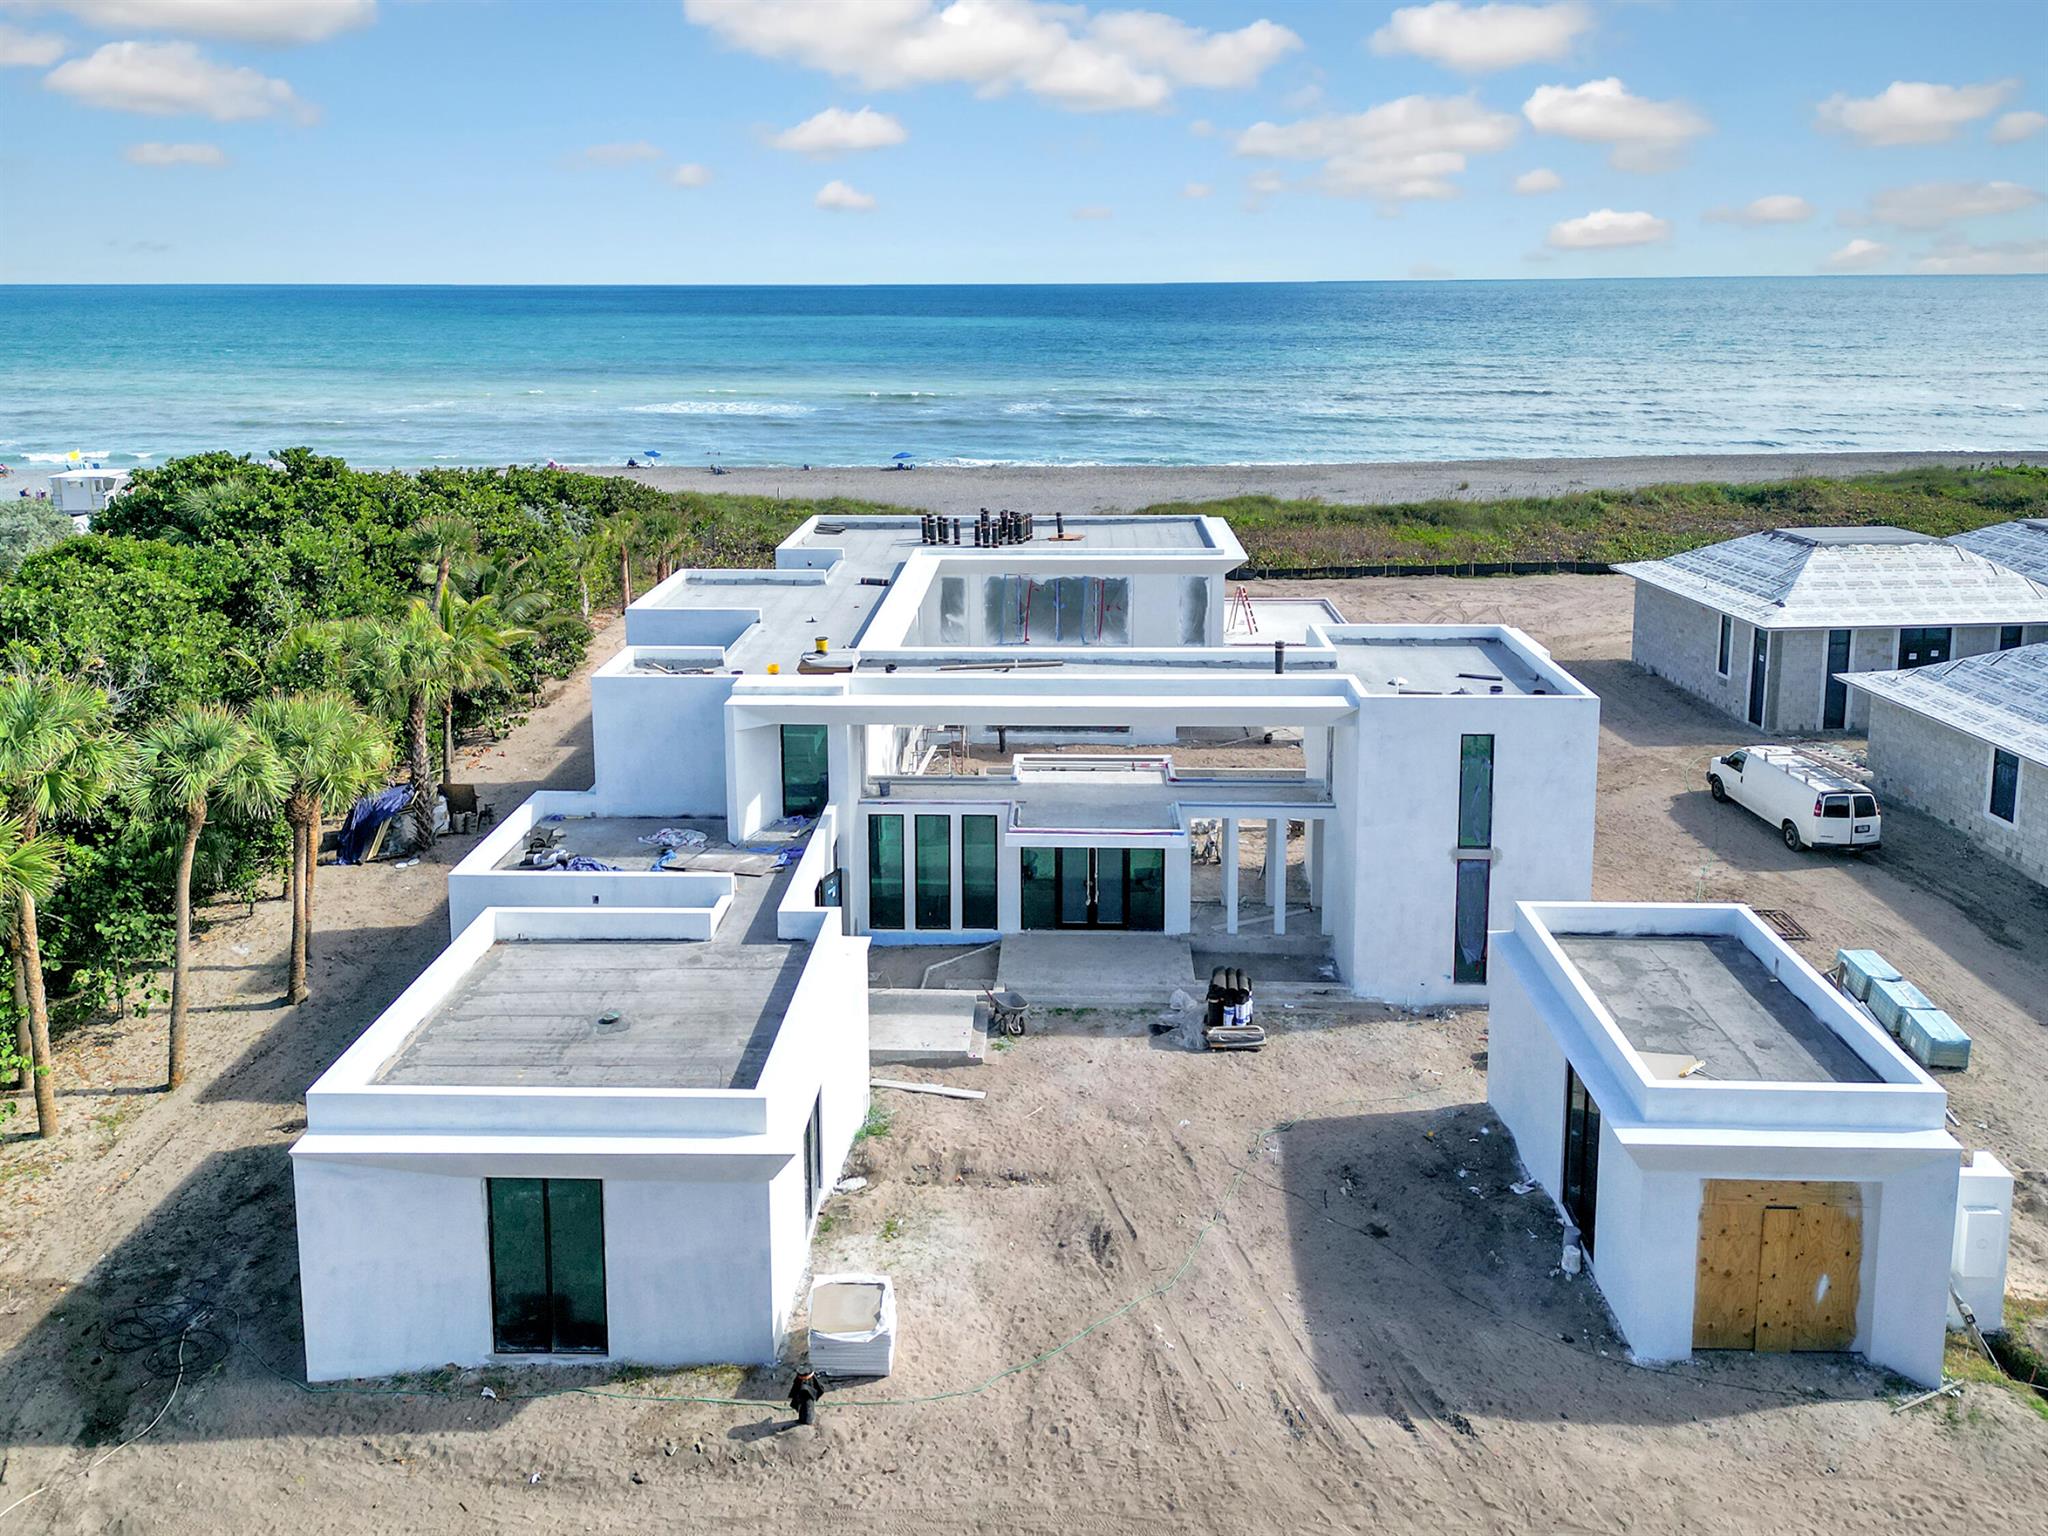 Experience the breathtaking beauty of brand-new beachfront construction right on Jupiter Island! This stunning contemporary masterpiece will offer unobstructed ocean vistas from every angle within the 6,500 square feet of air-conditioned living space, featuring five bedrooms and five and a half bathrooms. Expect nothing less than the utmost in quality construction, premium materials, and top-tier finishes for this residence. Crafted by the skilled hands of Affinity Architects, this home is not only a testament to exceptional style but also practicality. Seize this incredible opportunity at $19,500,000 and secure your piece of paradise by the sea.